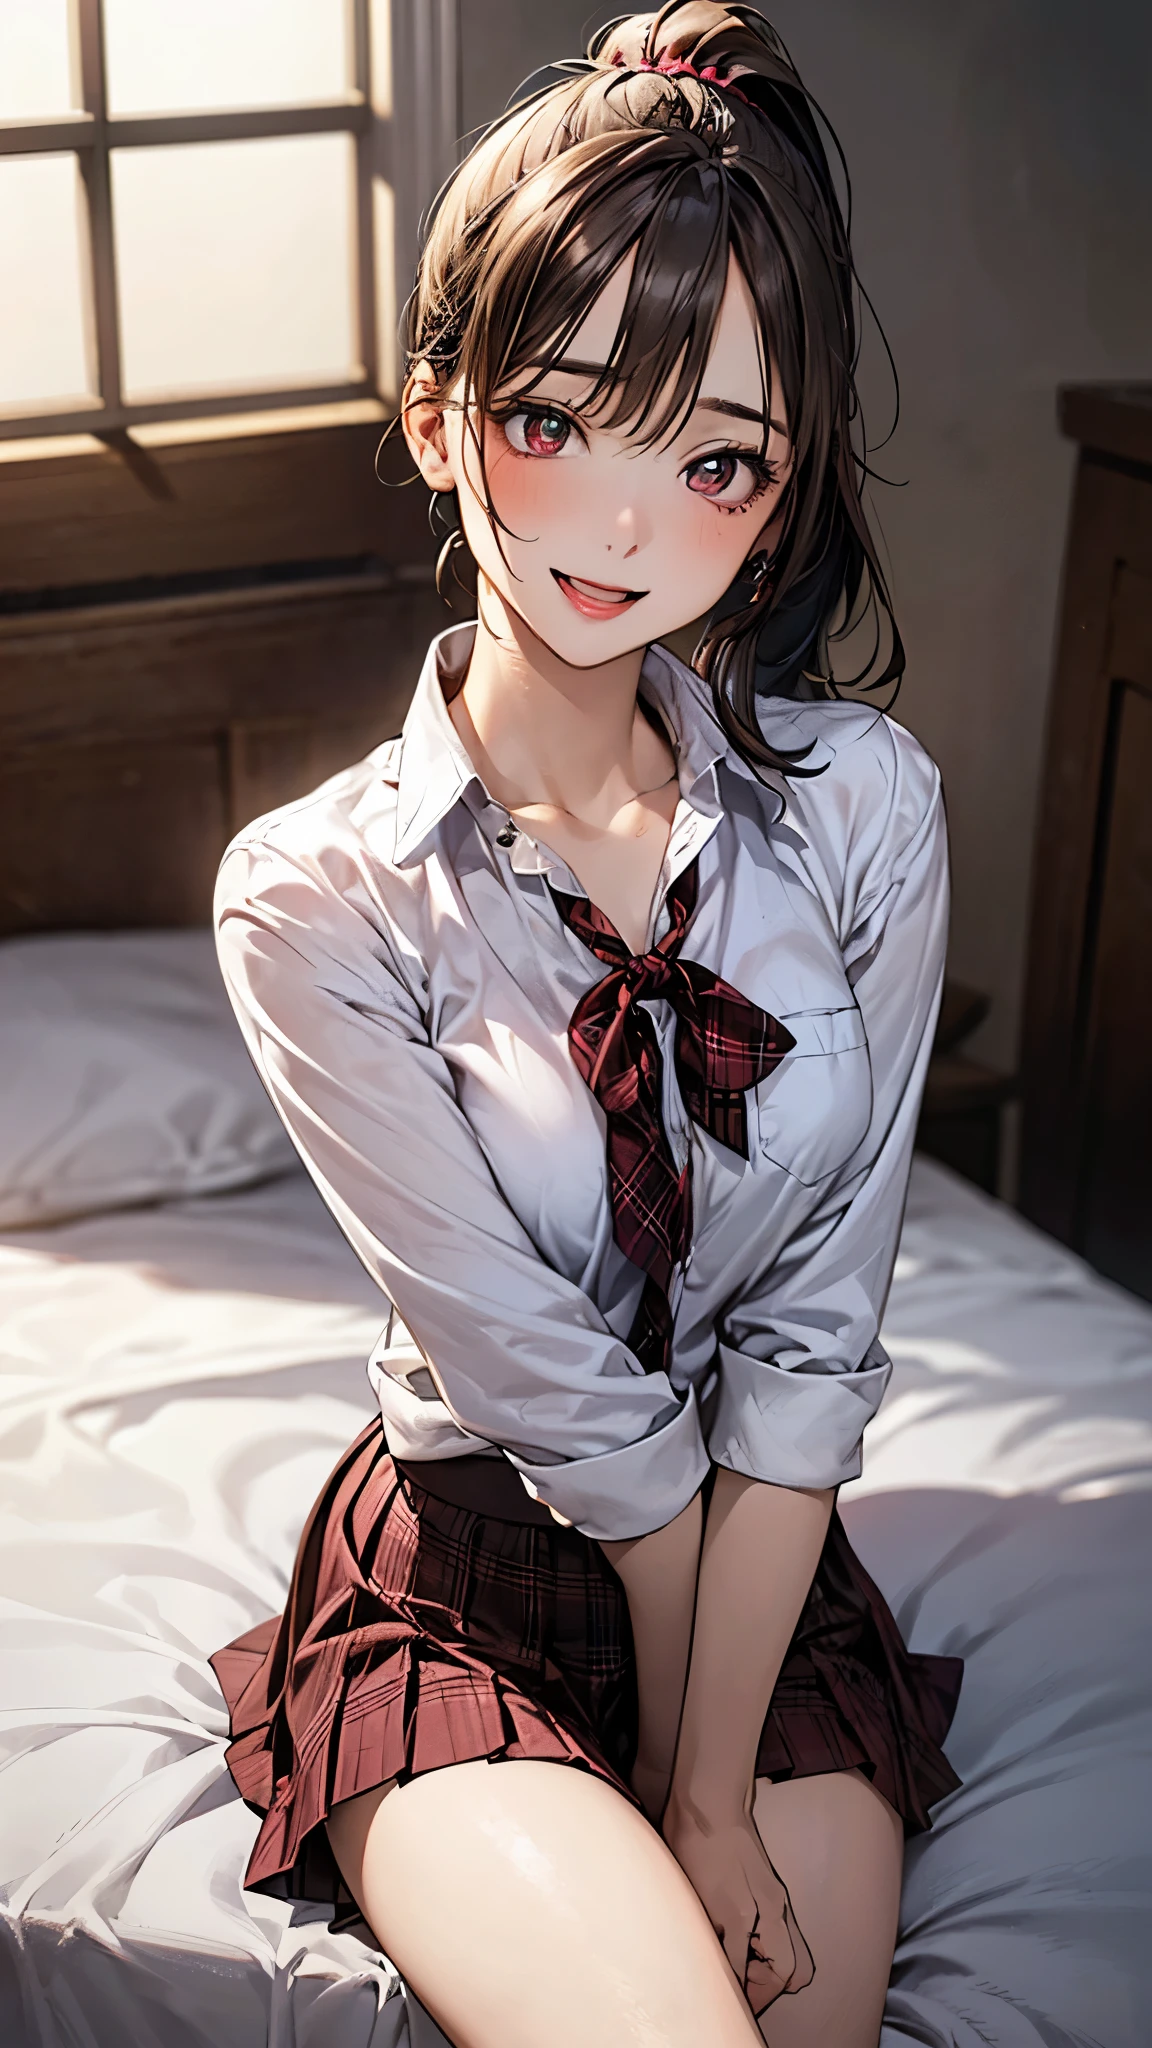 (masterpiece:1.3, top-quality, ultra high res, ultra detailed), (realistic, photorealistic:1.4), beautiful illustration, perfect lighting, natural lighting, colorful, depth of fields, 
beautiful detailed hair, beautiful detailed face, beautiful detailed eyes, beautiful clavicle, beautiful body, beautiful chest, beautiful thigh, beautiful legs, beautiful fingers, 
looking at viewer, front view:0.6. 1 girl, japanese, high school girl, perfect face, (perfect anatomy, anatomically correct), cute and symmetrical face, babyface, , shiny skin, 
(short hair:1.7, high ponytail:1.6, brown hair), crossed bangs, dark brown eyes, slant eyes, long eye lasher, (medium breasts), slender, 
(collared white shirt, dark red plaid pleated skirt, dark red neck ribbon), bottomless,
(beautiful scenery), evening, (bed room), sitting bed, (seductive smile, upper eyes, open mouth),